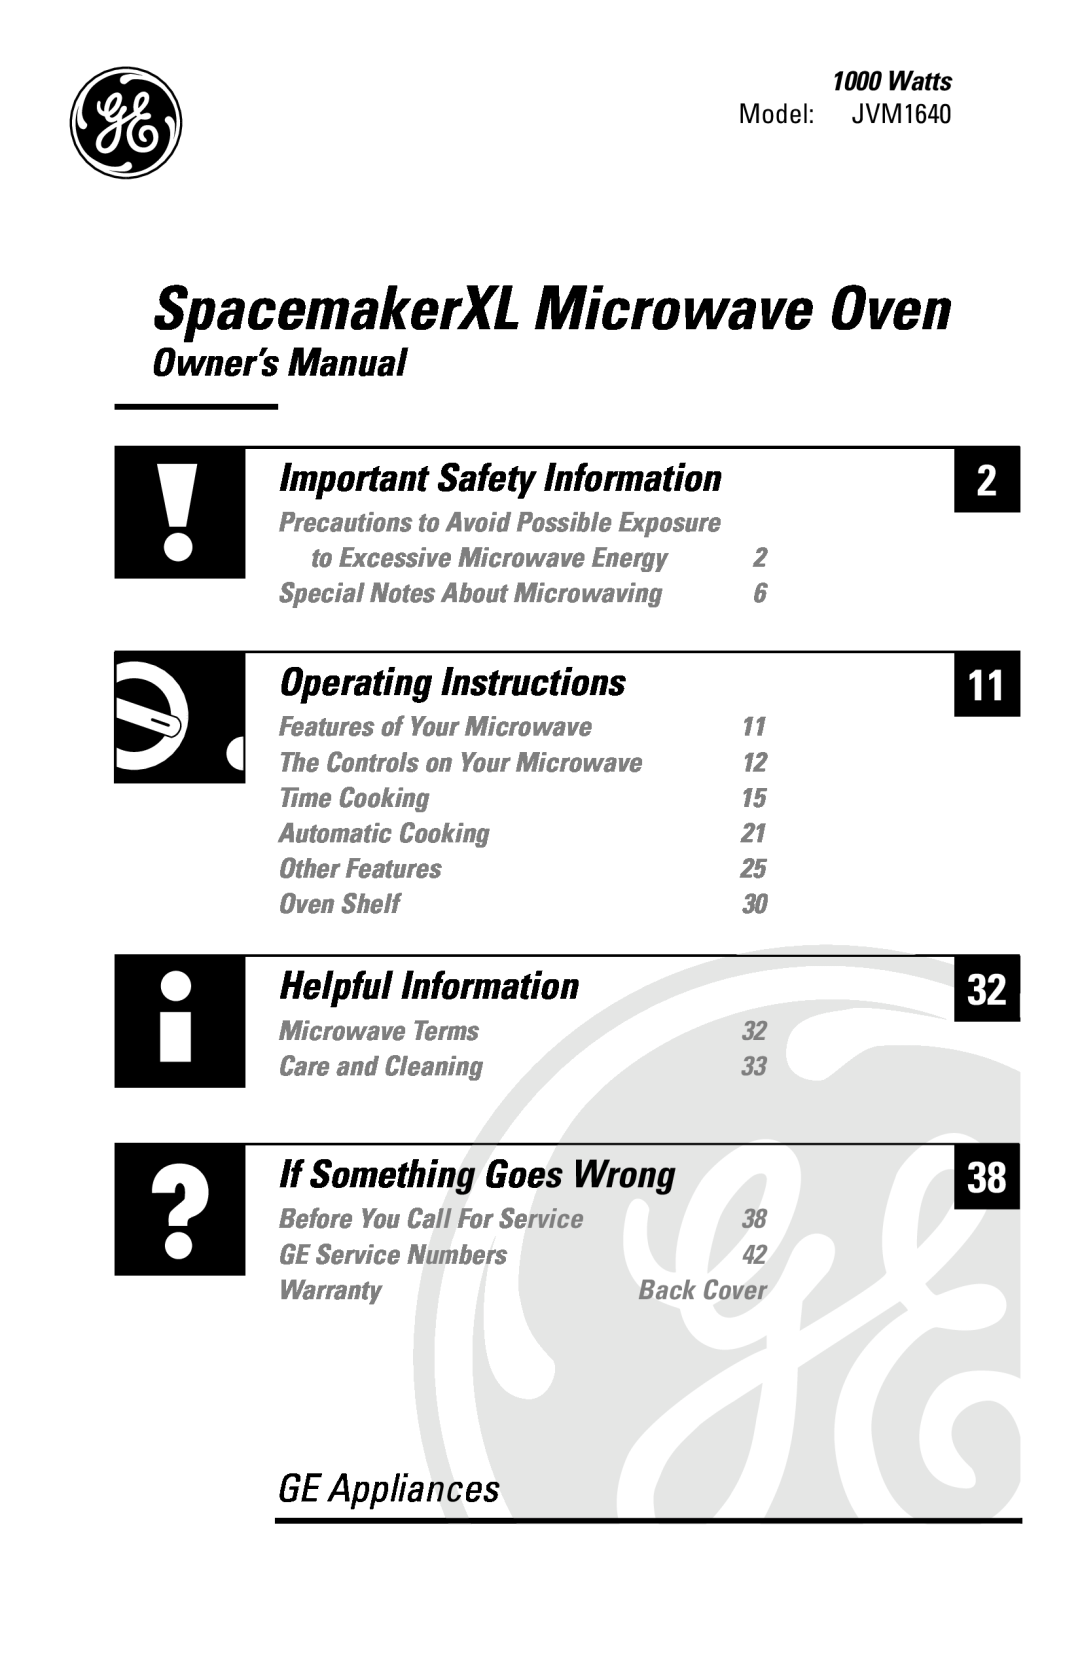 GE JVM1640AB owner manual Owner’s Manual, Watts, SpacemakerXL Microwave Oven, GE Appliances, Operating Instructions 